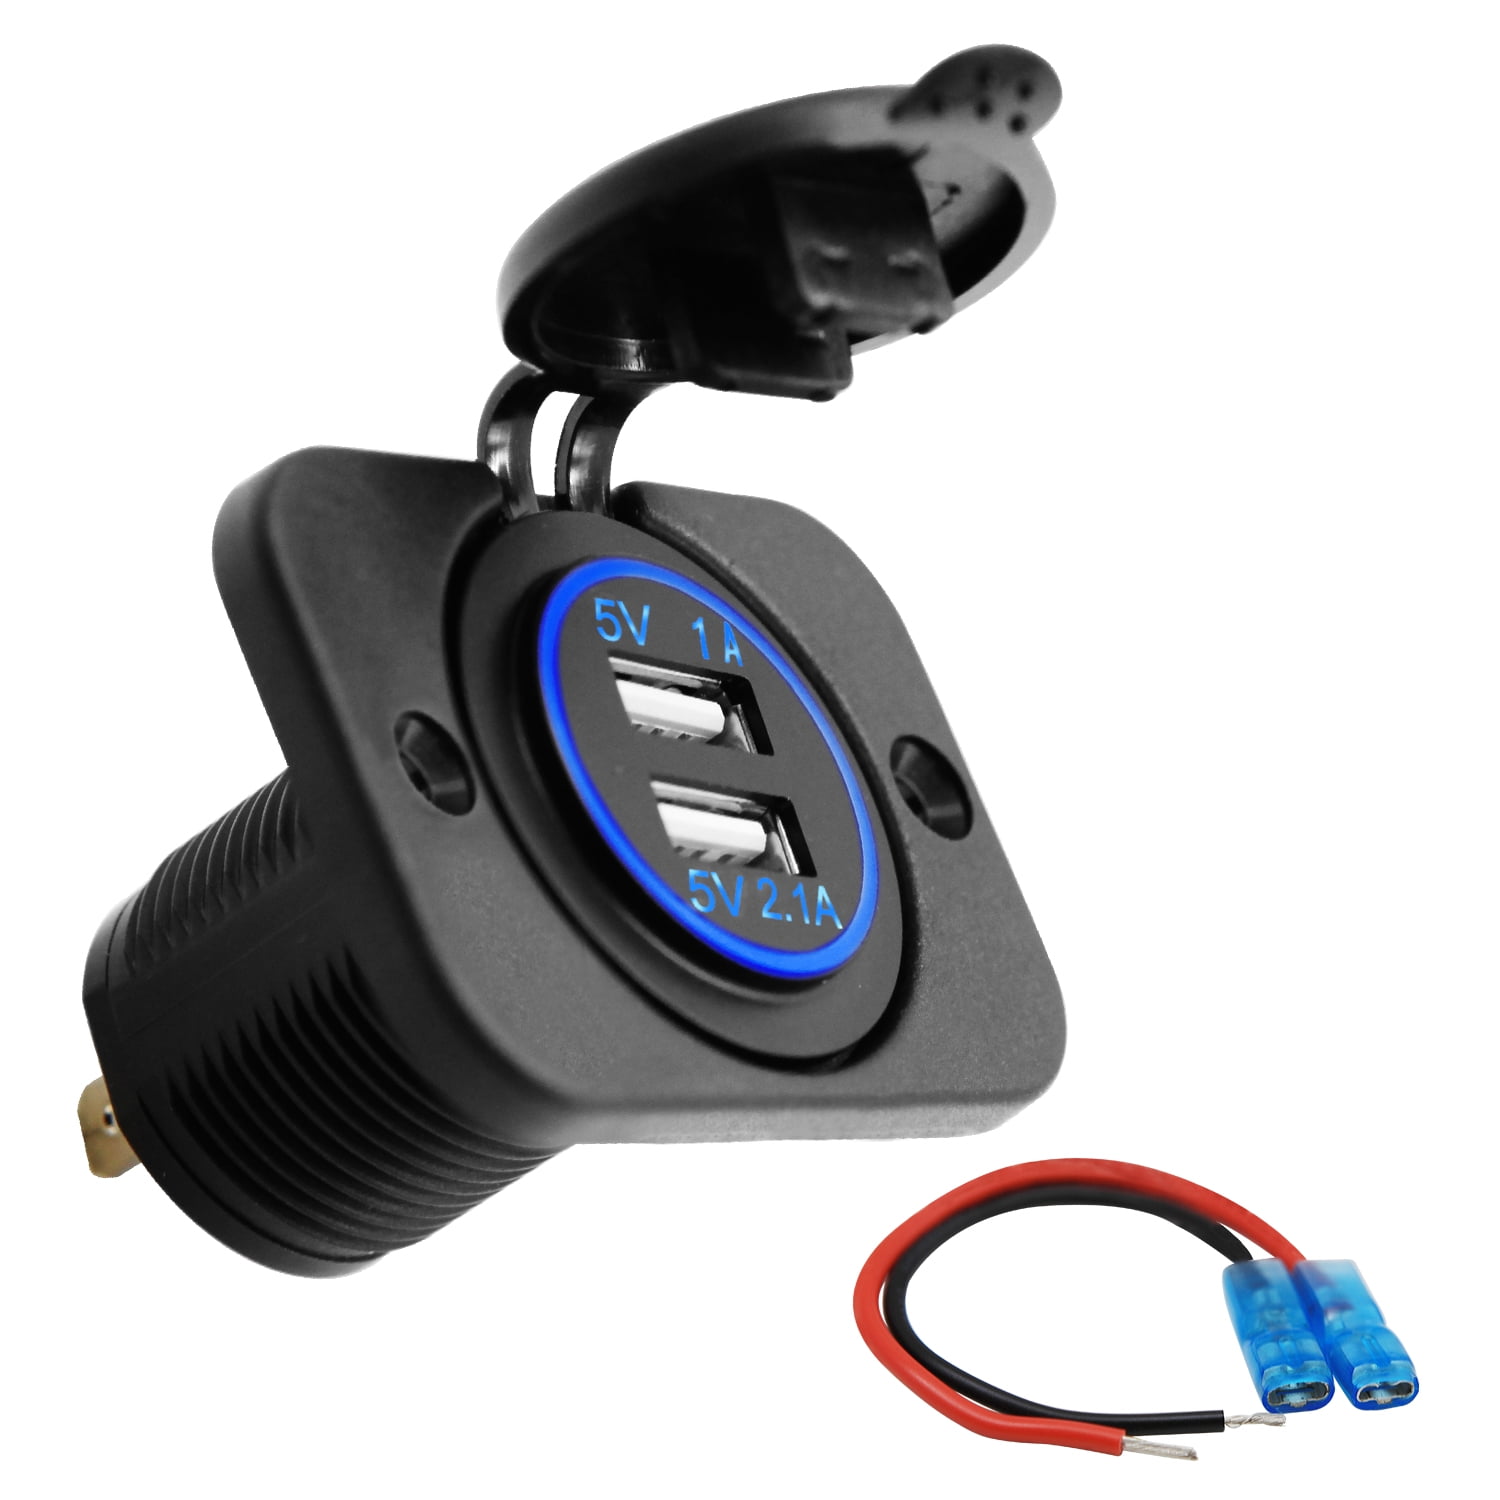 lPhone Fast Charger for Car Boat Marine ATV Truck Motorcycle Car Charger Quick Charge 3.0 & PD Dual USB with Voltmeter Switch 48W Waterproof Power Outlet 12V/24V 